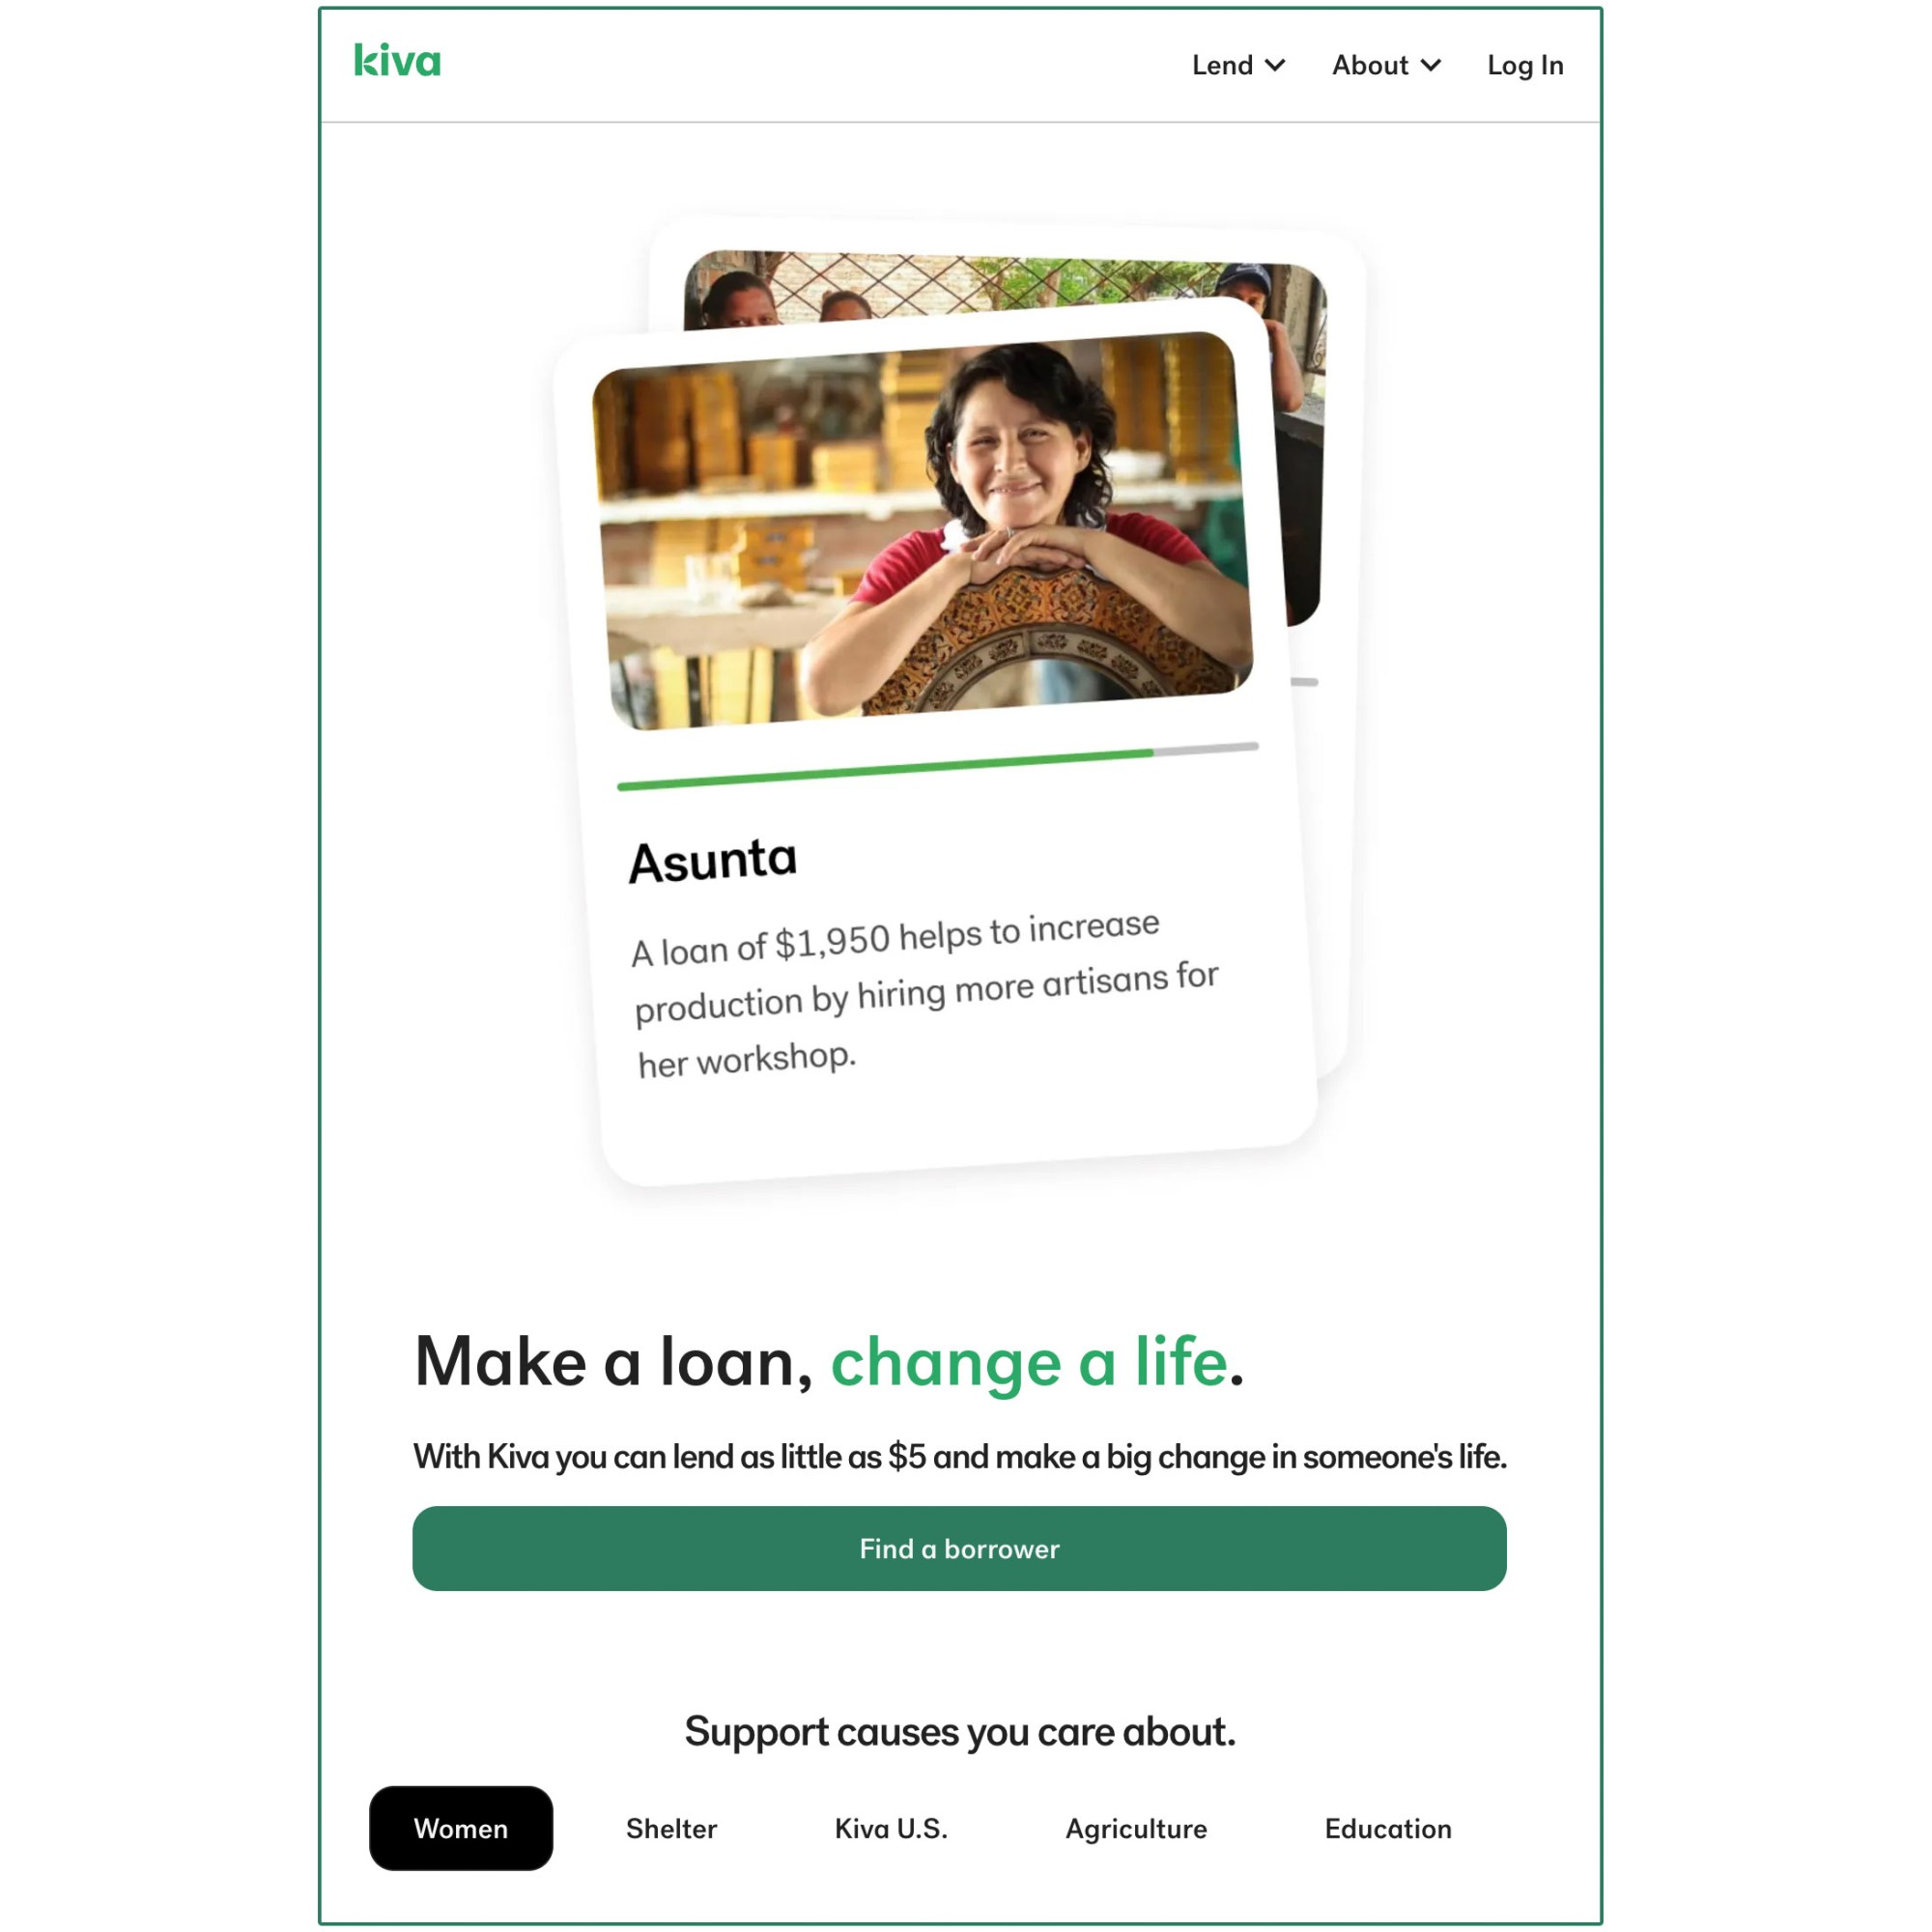 screenshot of the Kiva website that reads, "Make a loan, save a life. With Kiva you can make a loan as little as $5 and make a big change in someone's life."